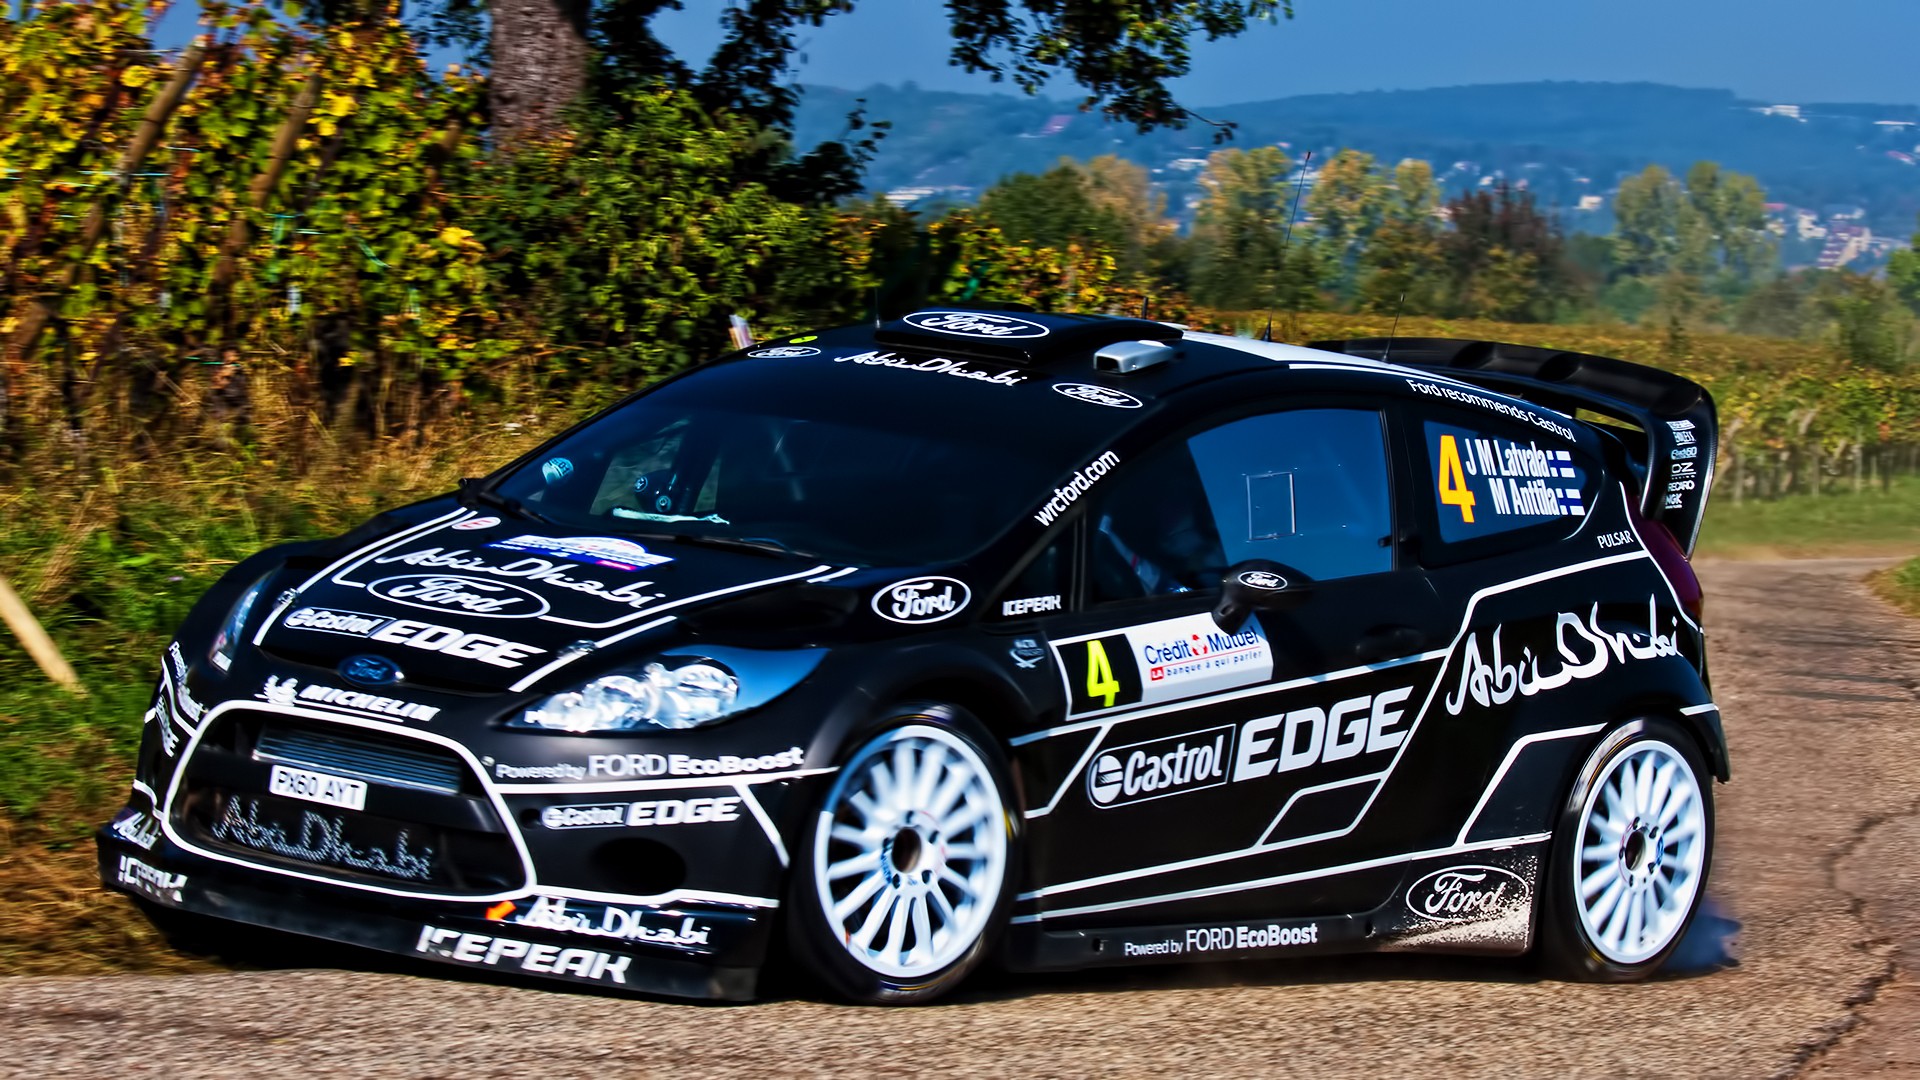 General 1920x1080 Ford Fiesta RS World Rally Championship race cars Ford Ford Fiesta rally cars black cars car vehicle racing motorsport livery British cars hatchbacks